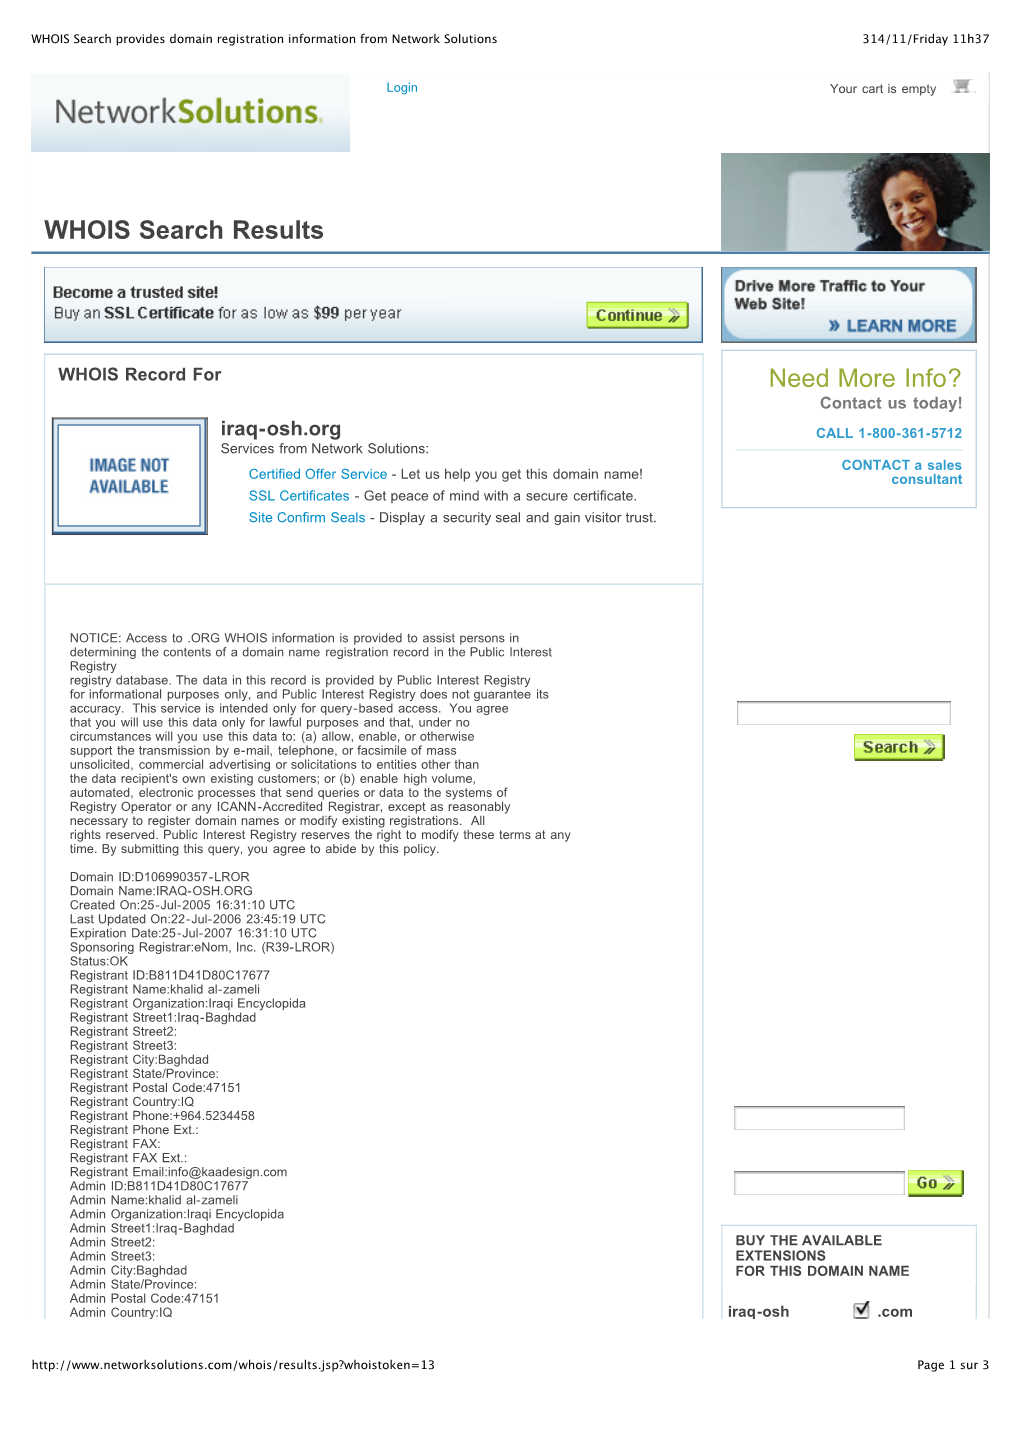 WHOIS Search Provides Domain Registration Information from Network Solutions 314/11/Friday 11H37